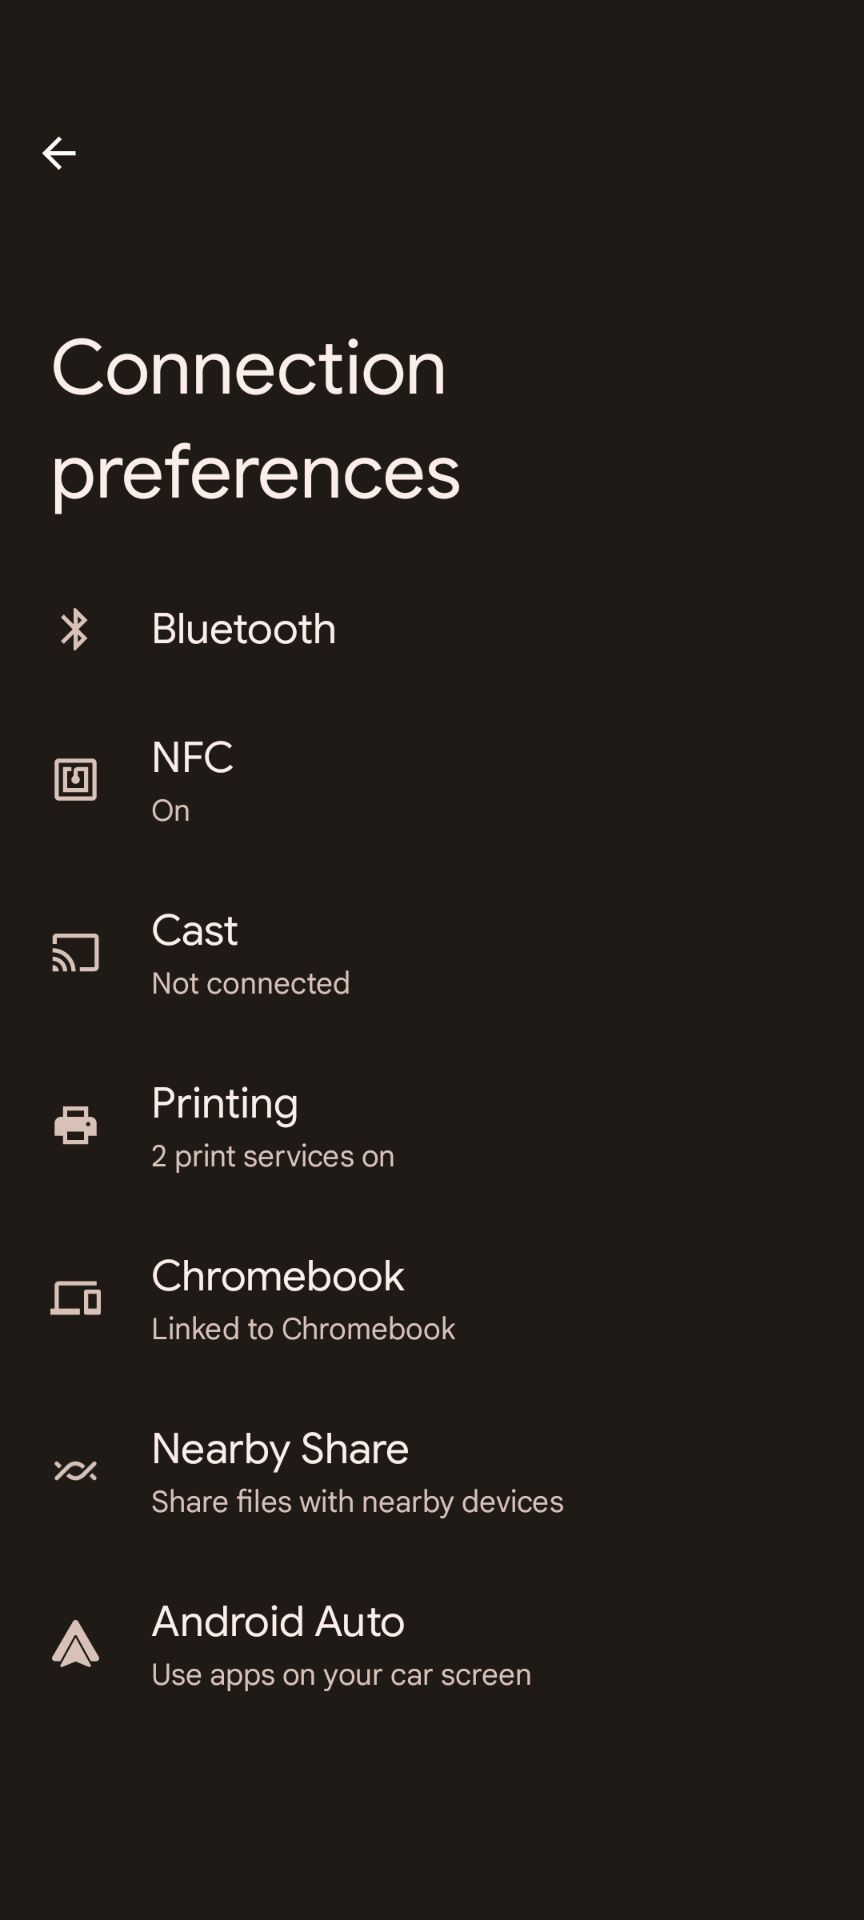 The Connection preferences settings on an Android phone